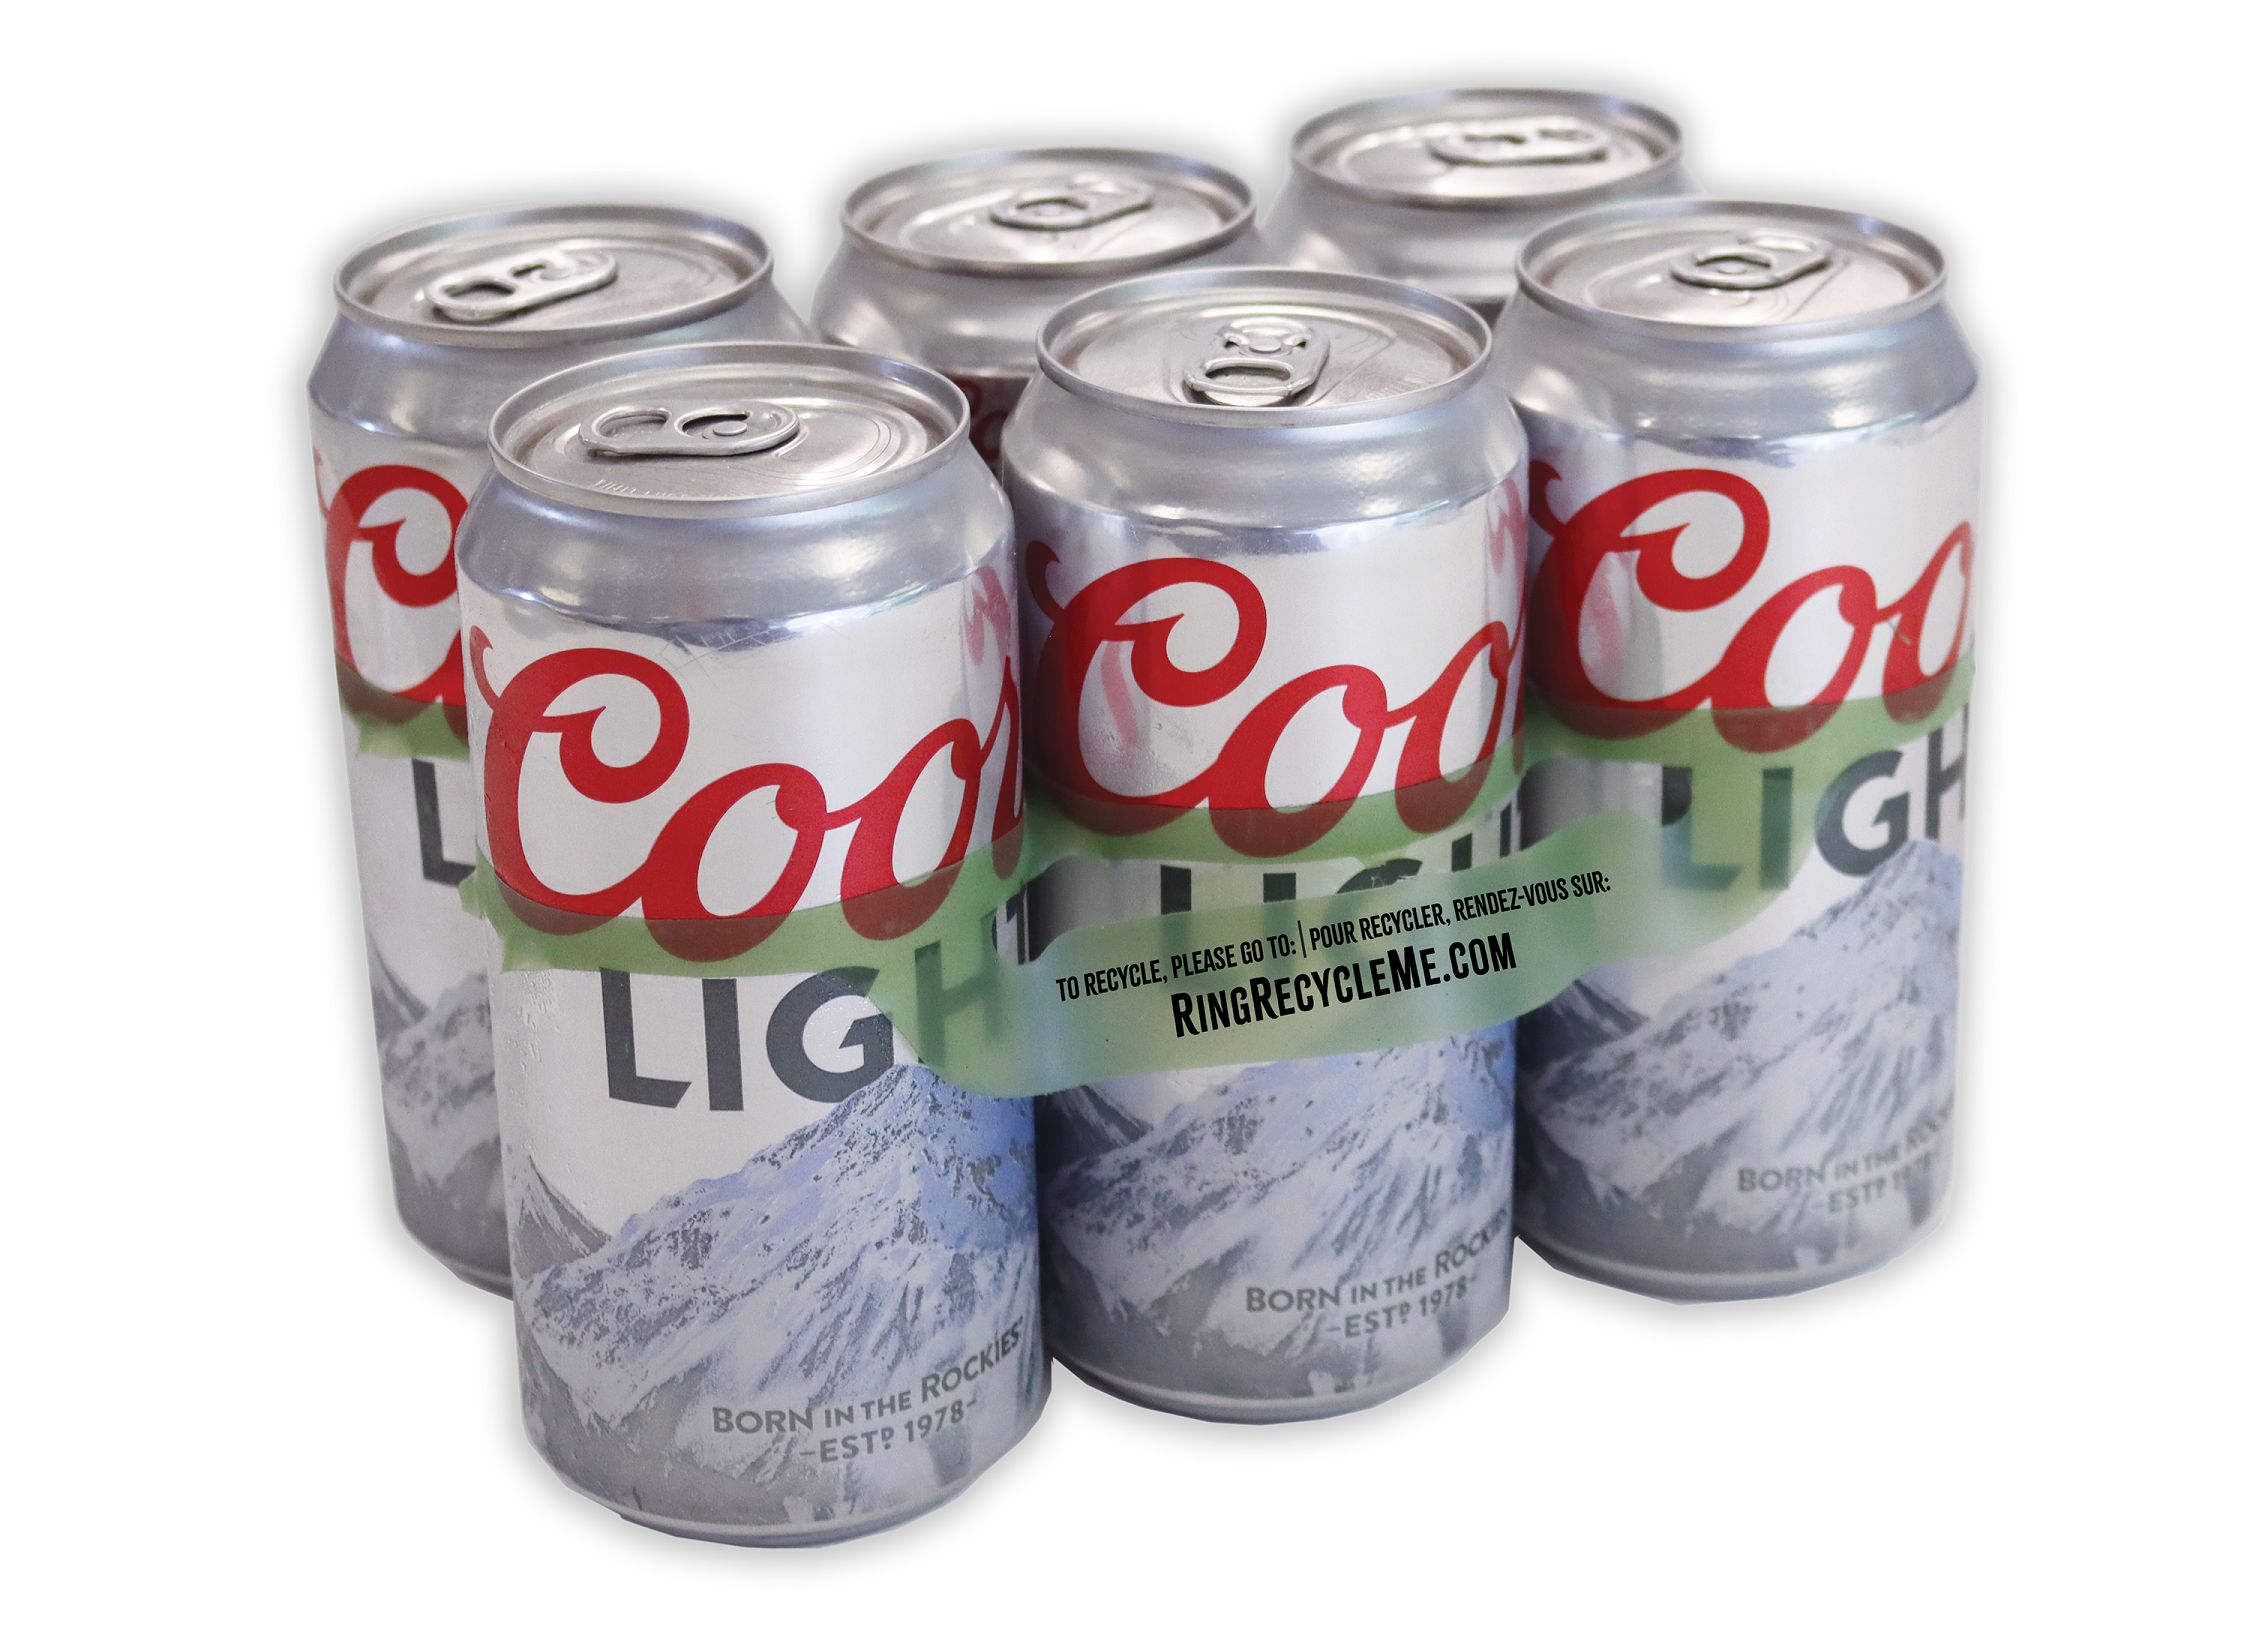 Sustainable Coors Light packaging